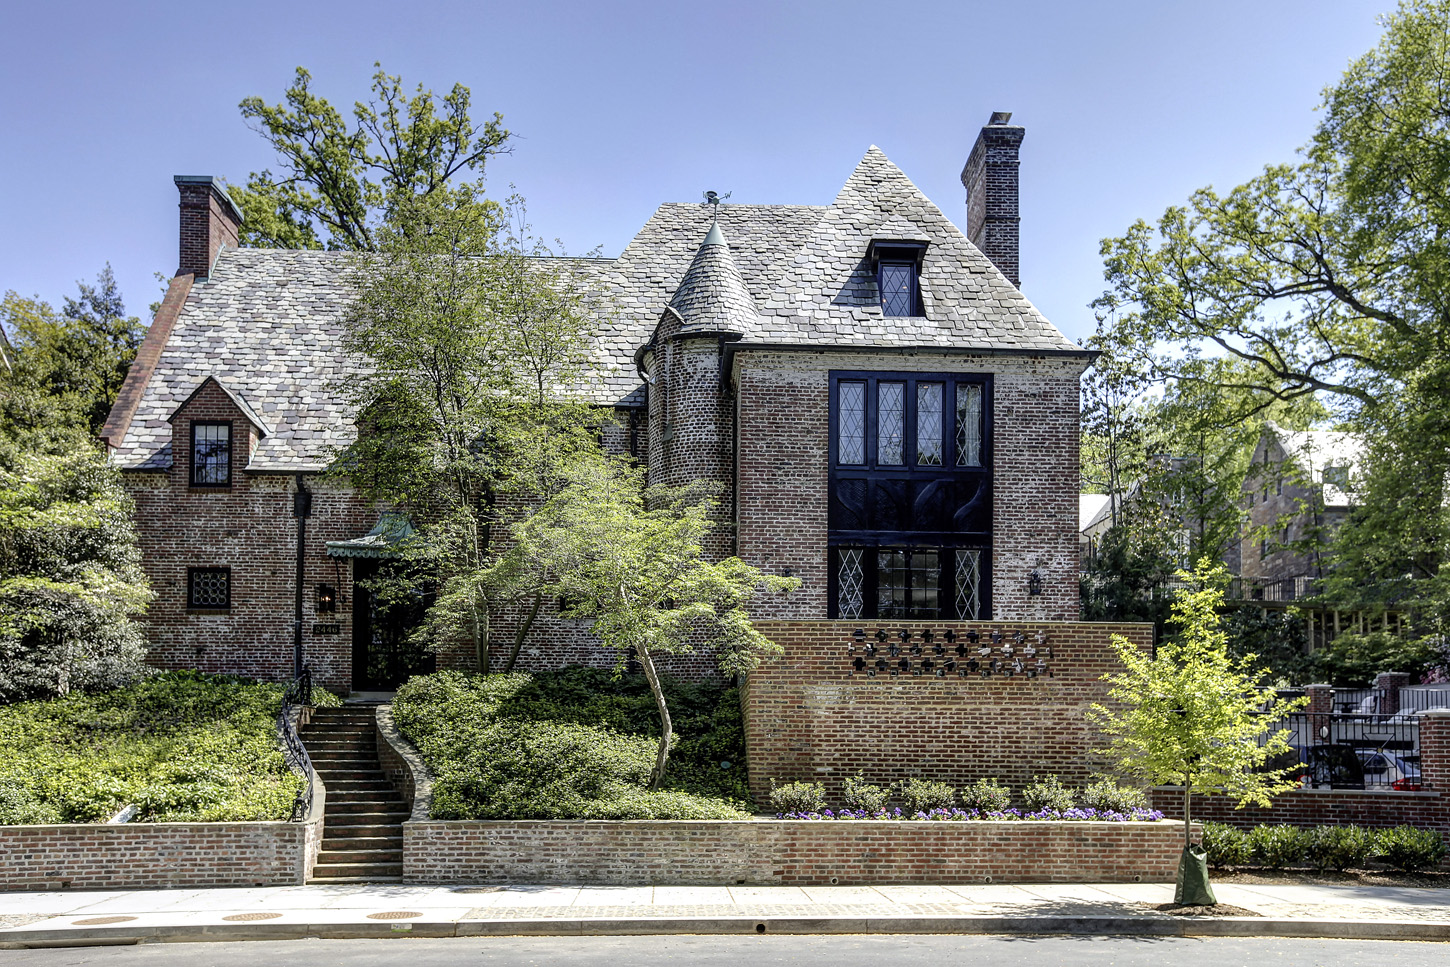 Here's a view of the front of the Obamas' new house, in the Kalorama area of Northwest D.C. (Courtesy McFadden Group)